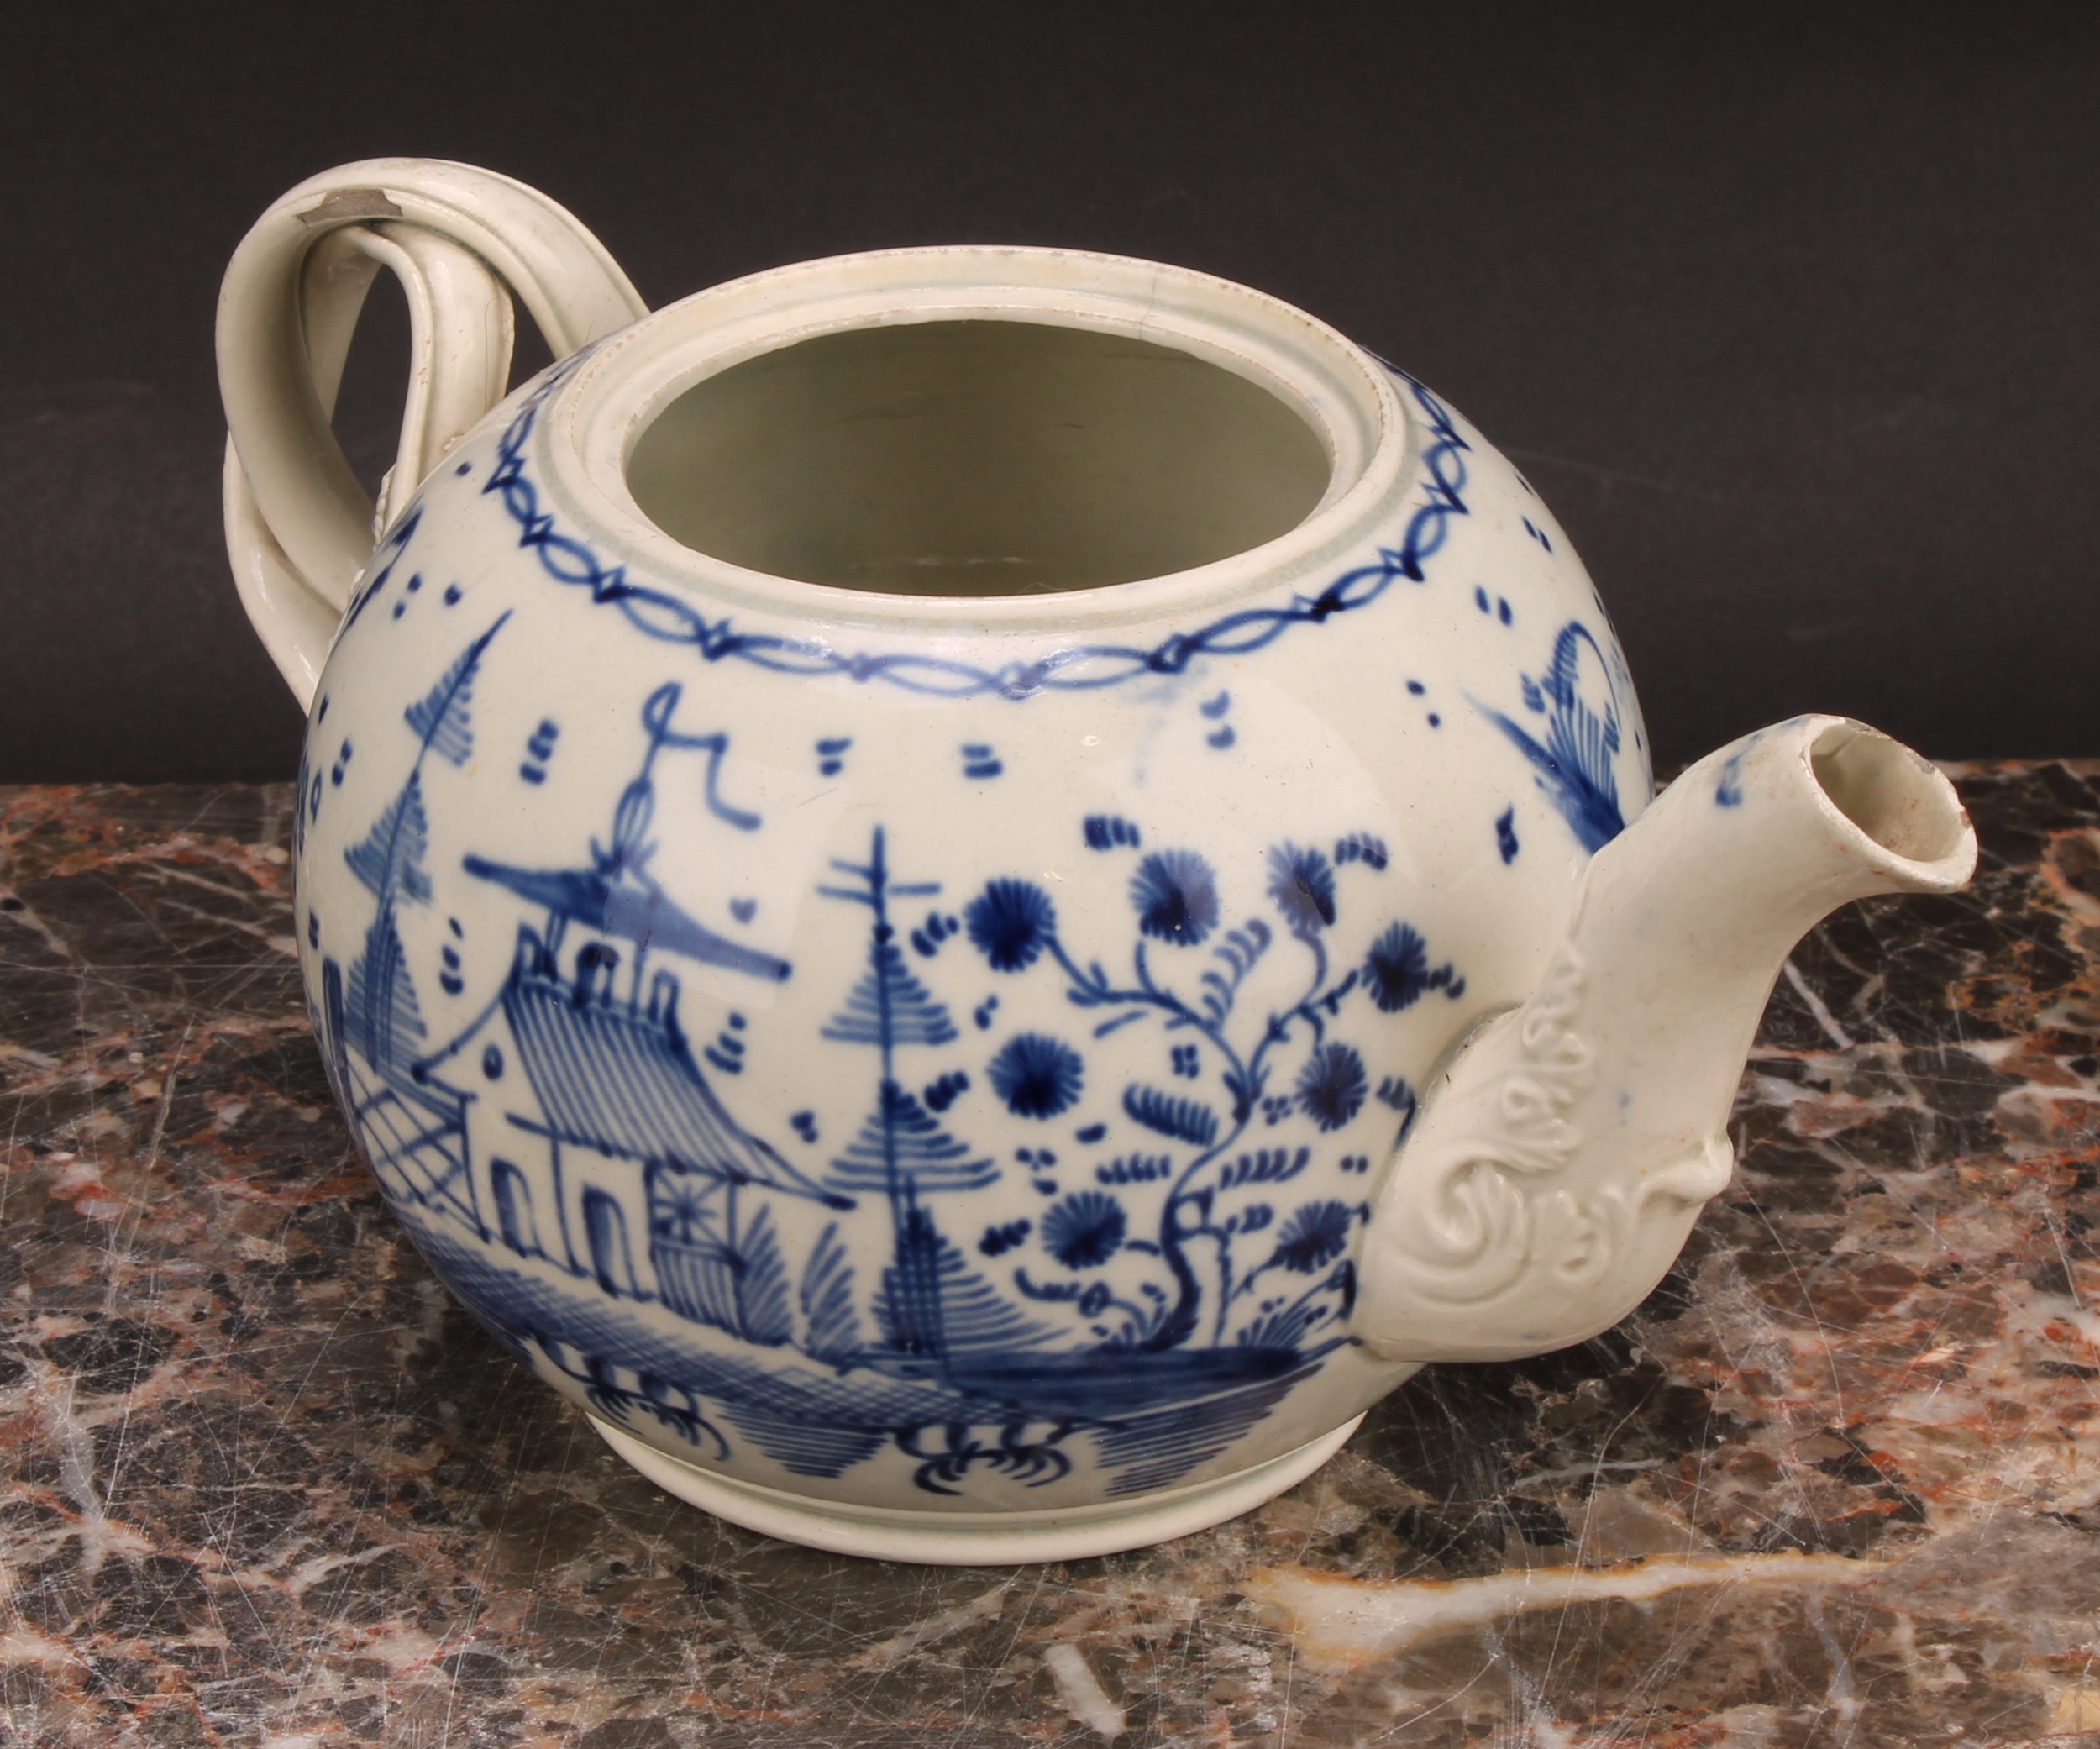 An 18th century Staffordshire pearlware globular teapot, painted in underglaze blue with a - Image 3 of 10